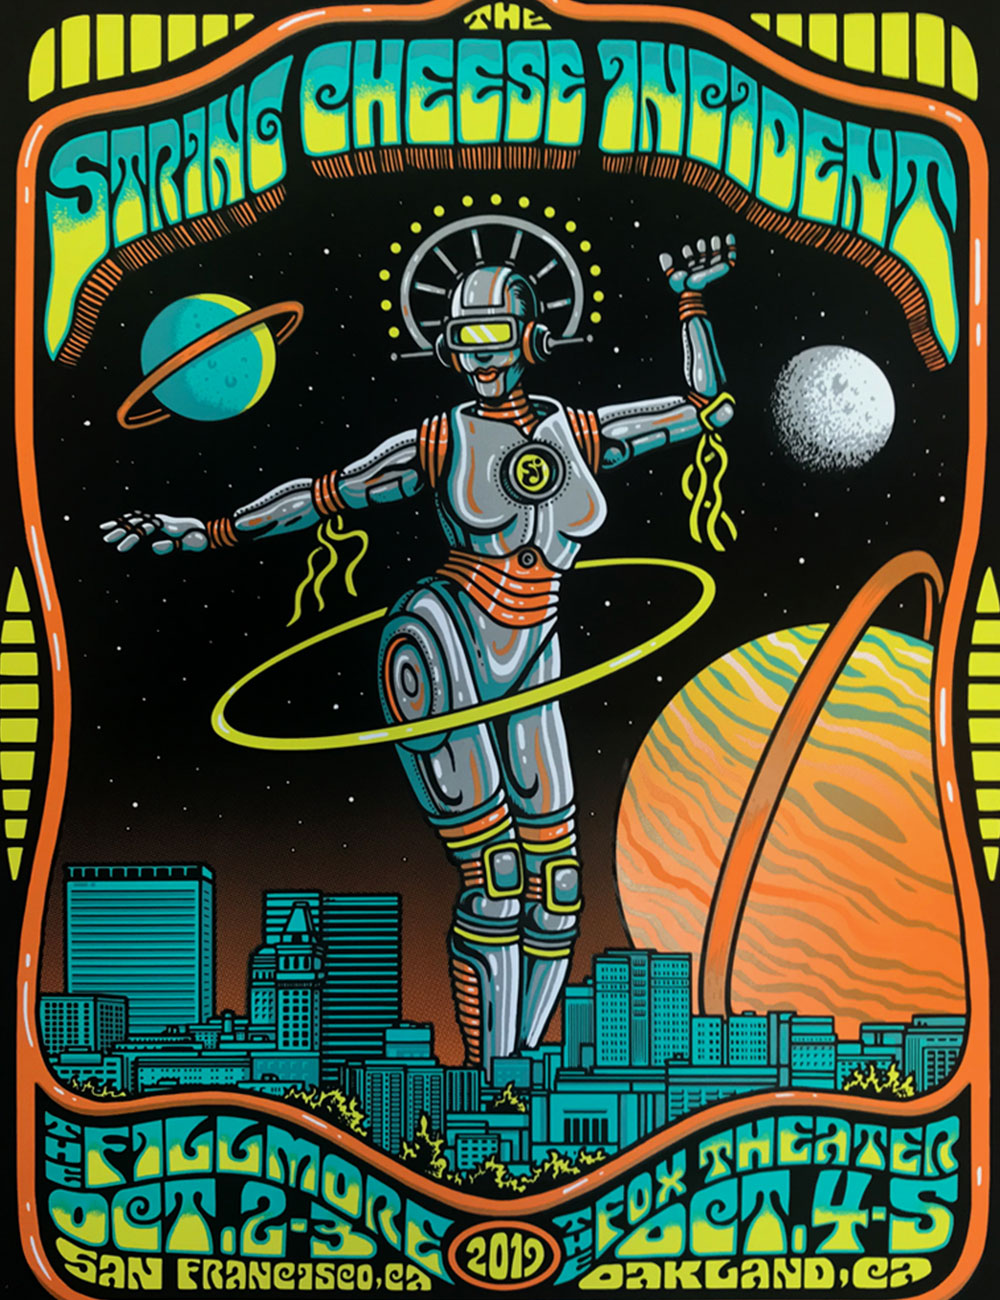 The String Cheese Incident - Merch - Poster - 2019 San Francisco and Oakland Shows - Detail